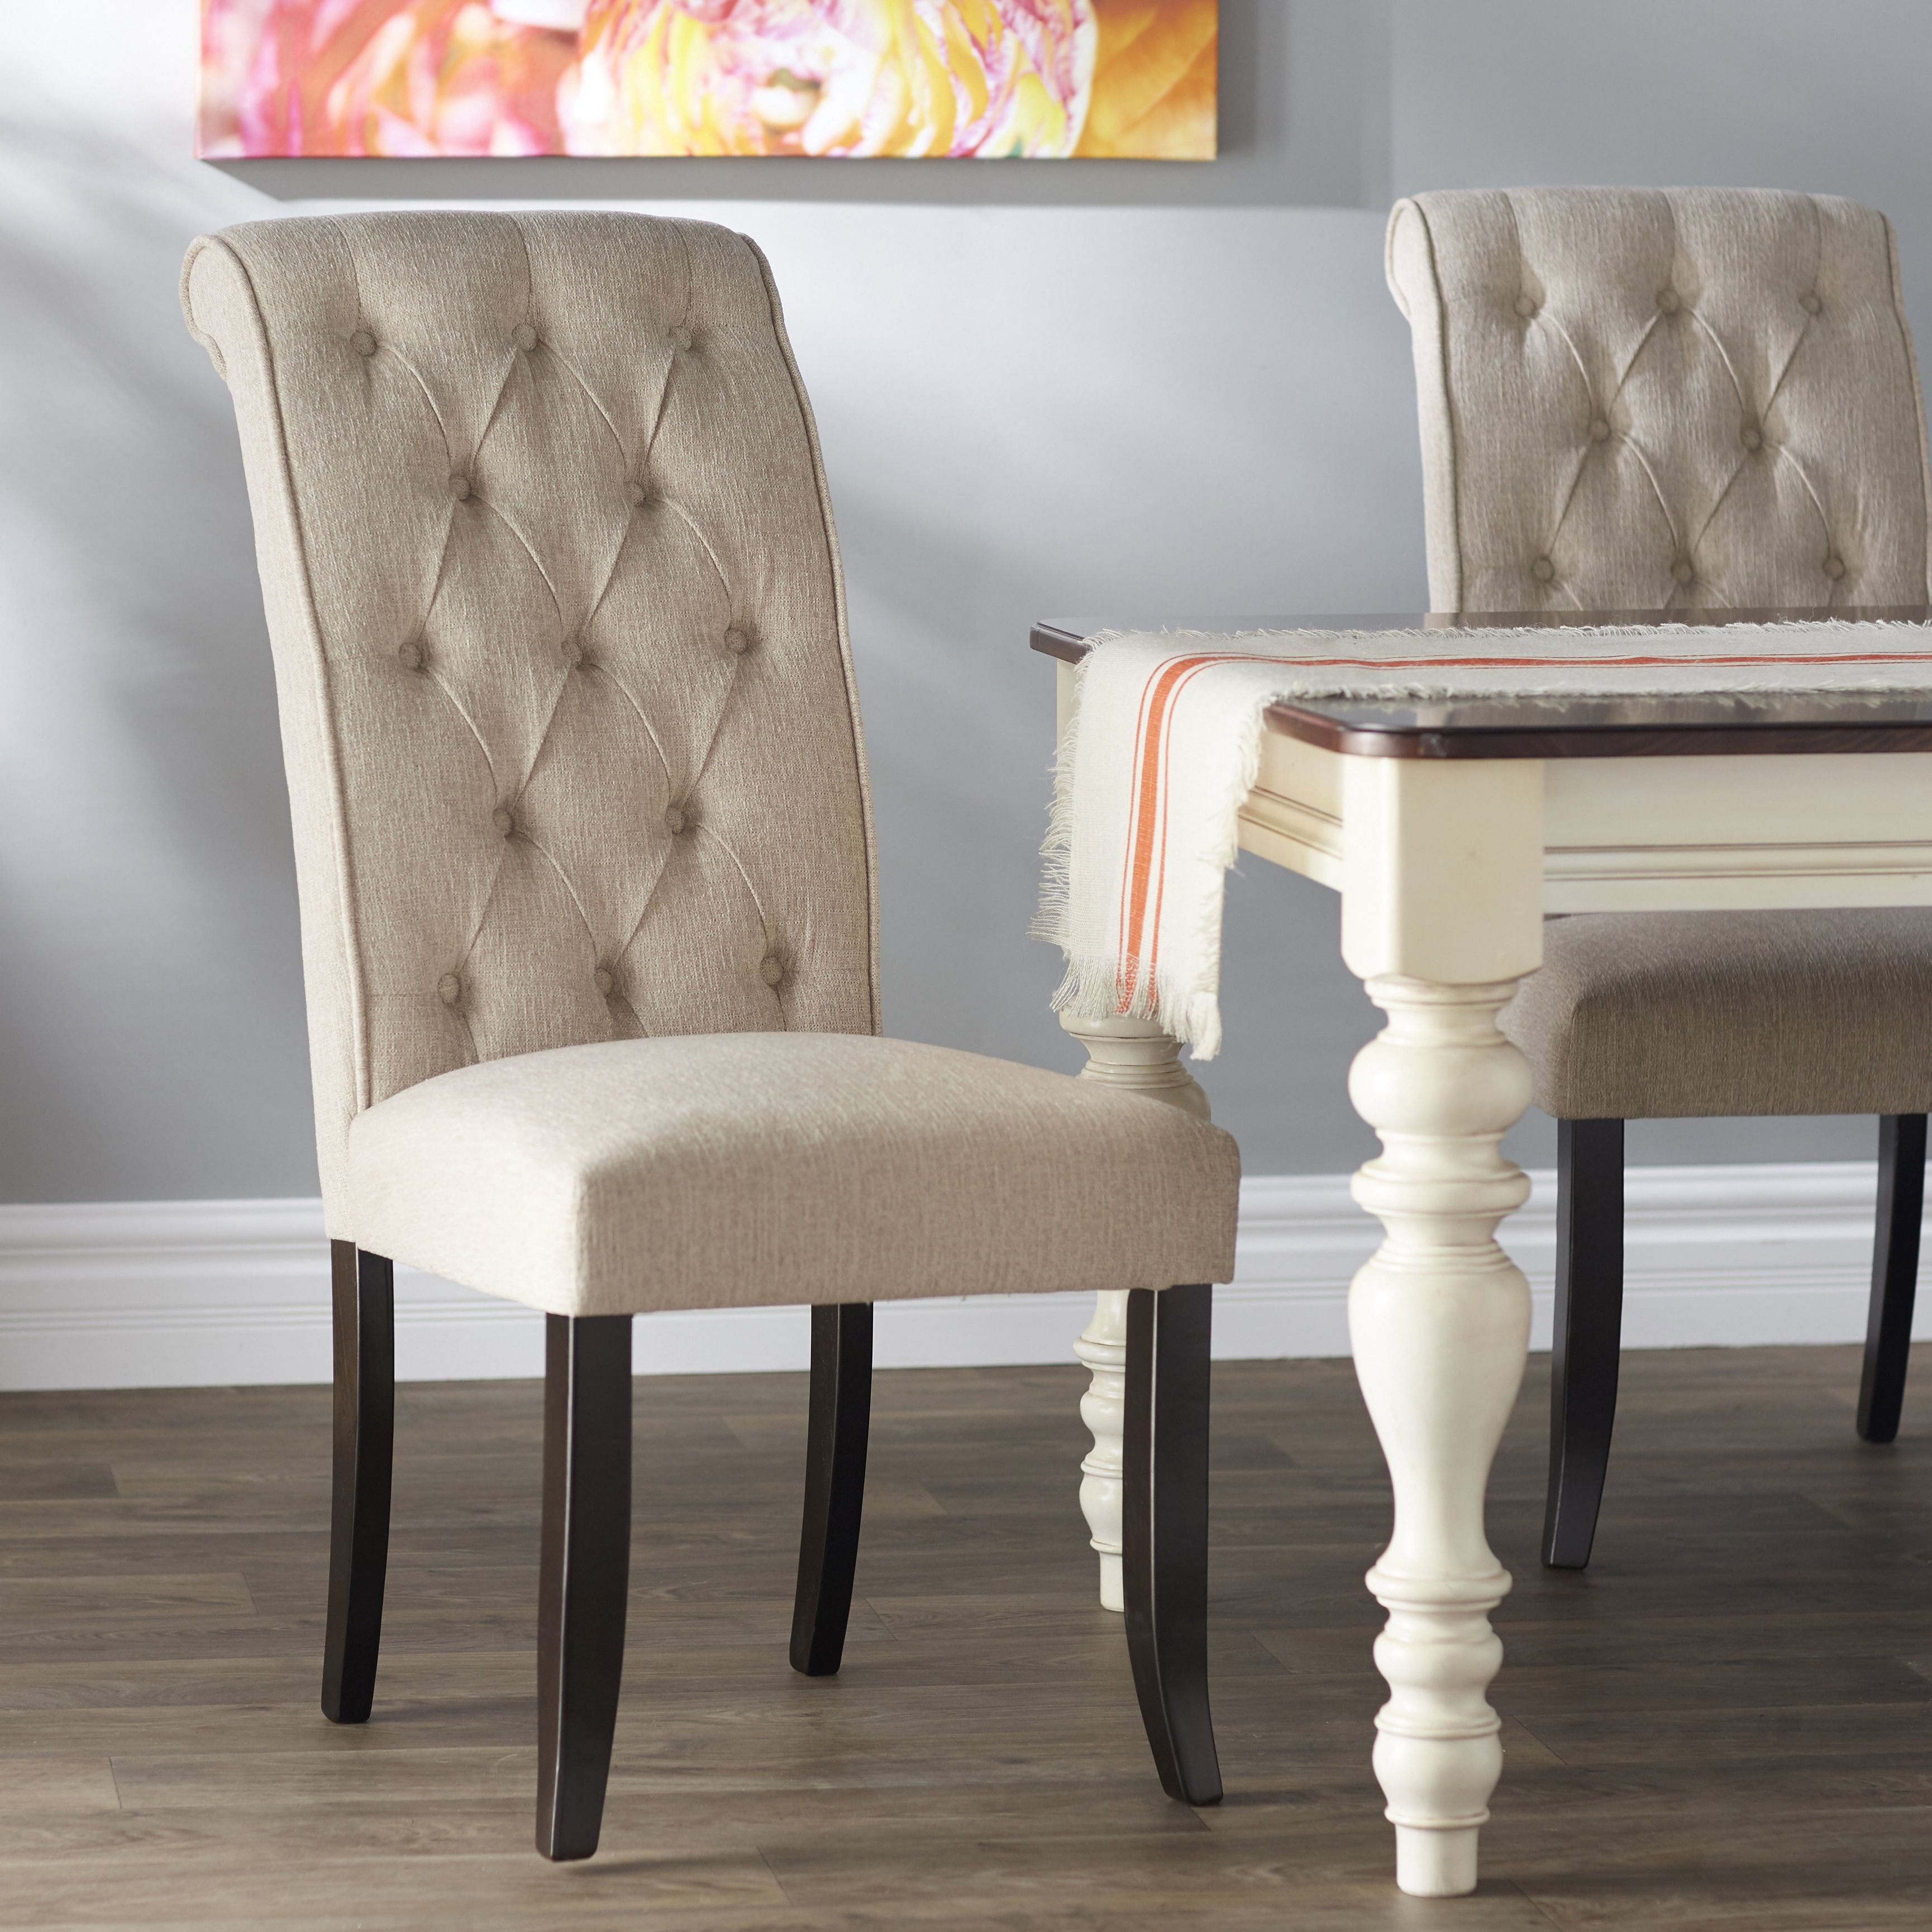 Signature Designashley Carville Tufted Side Chair & Reviews Throughout Most Recent Burton Metal Side Chairs With Wooden Seat (Photo 19 of 20)